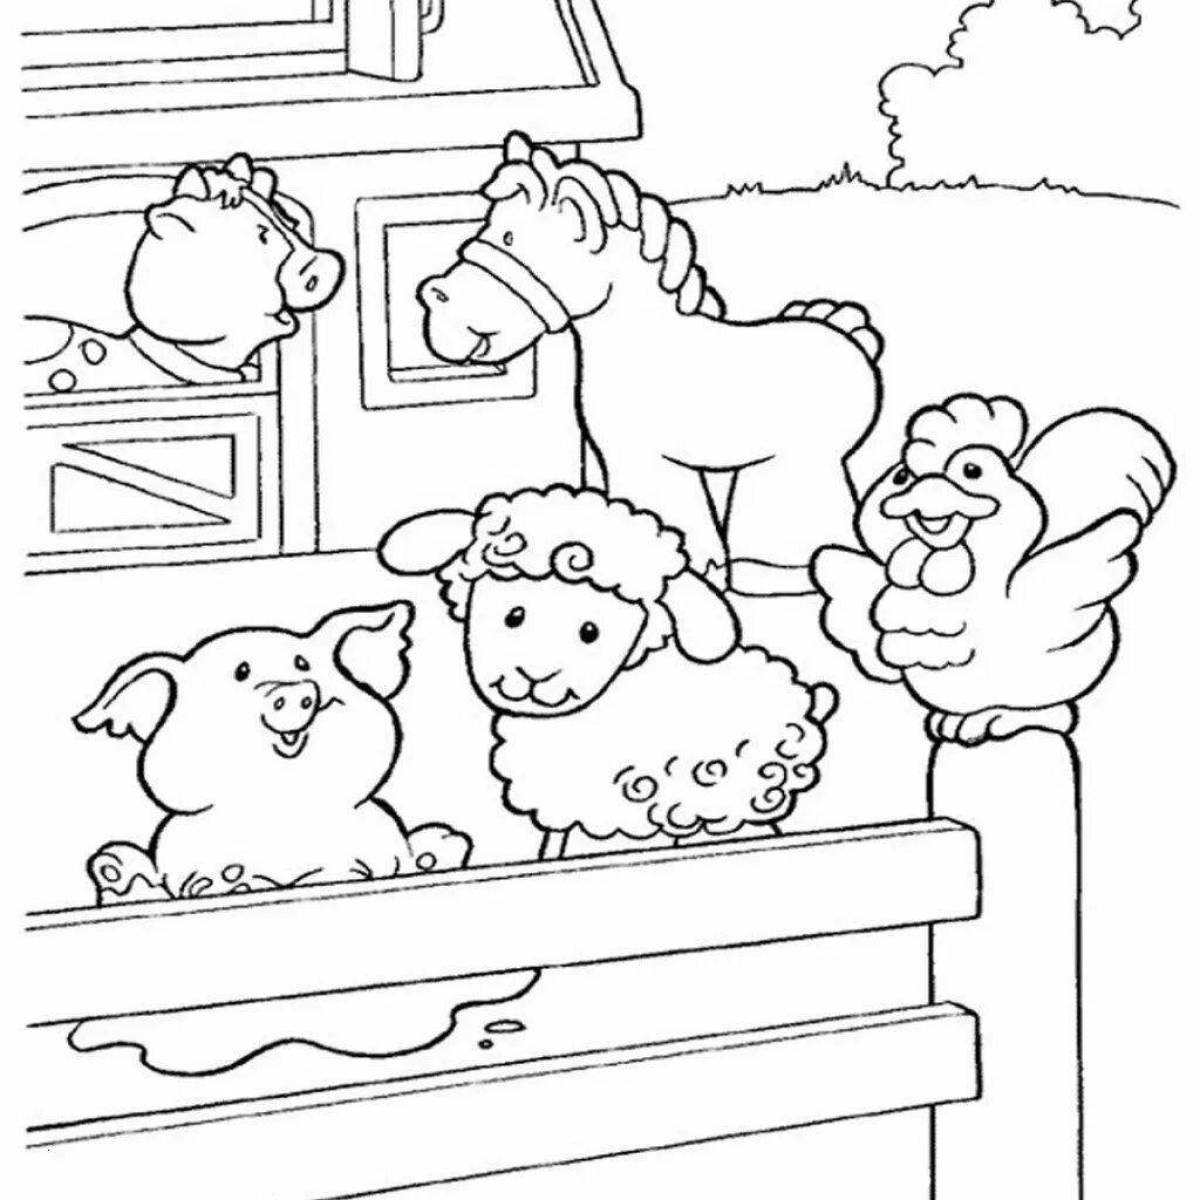 Coloring page majestic hut